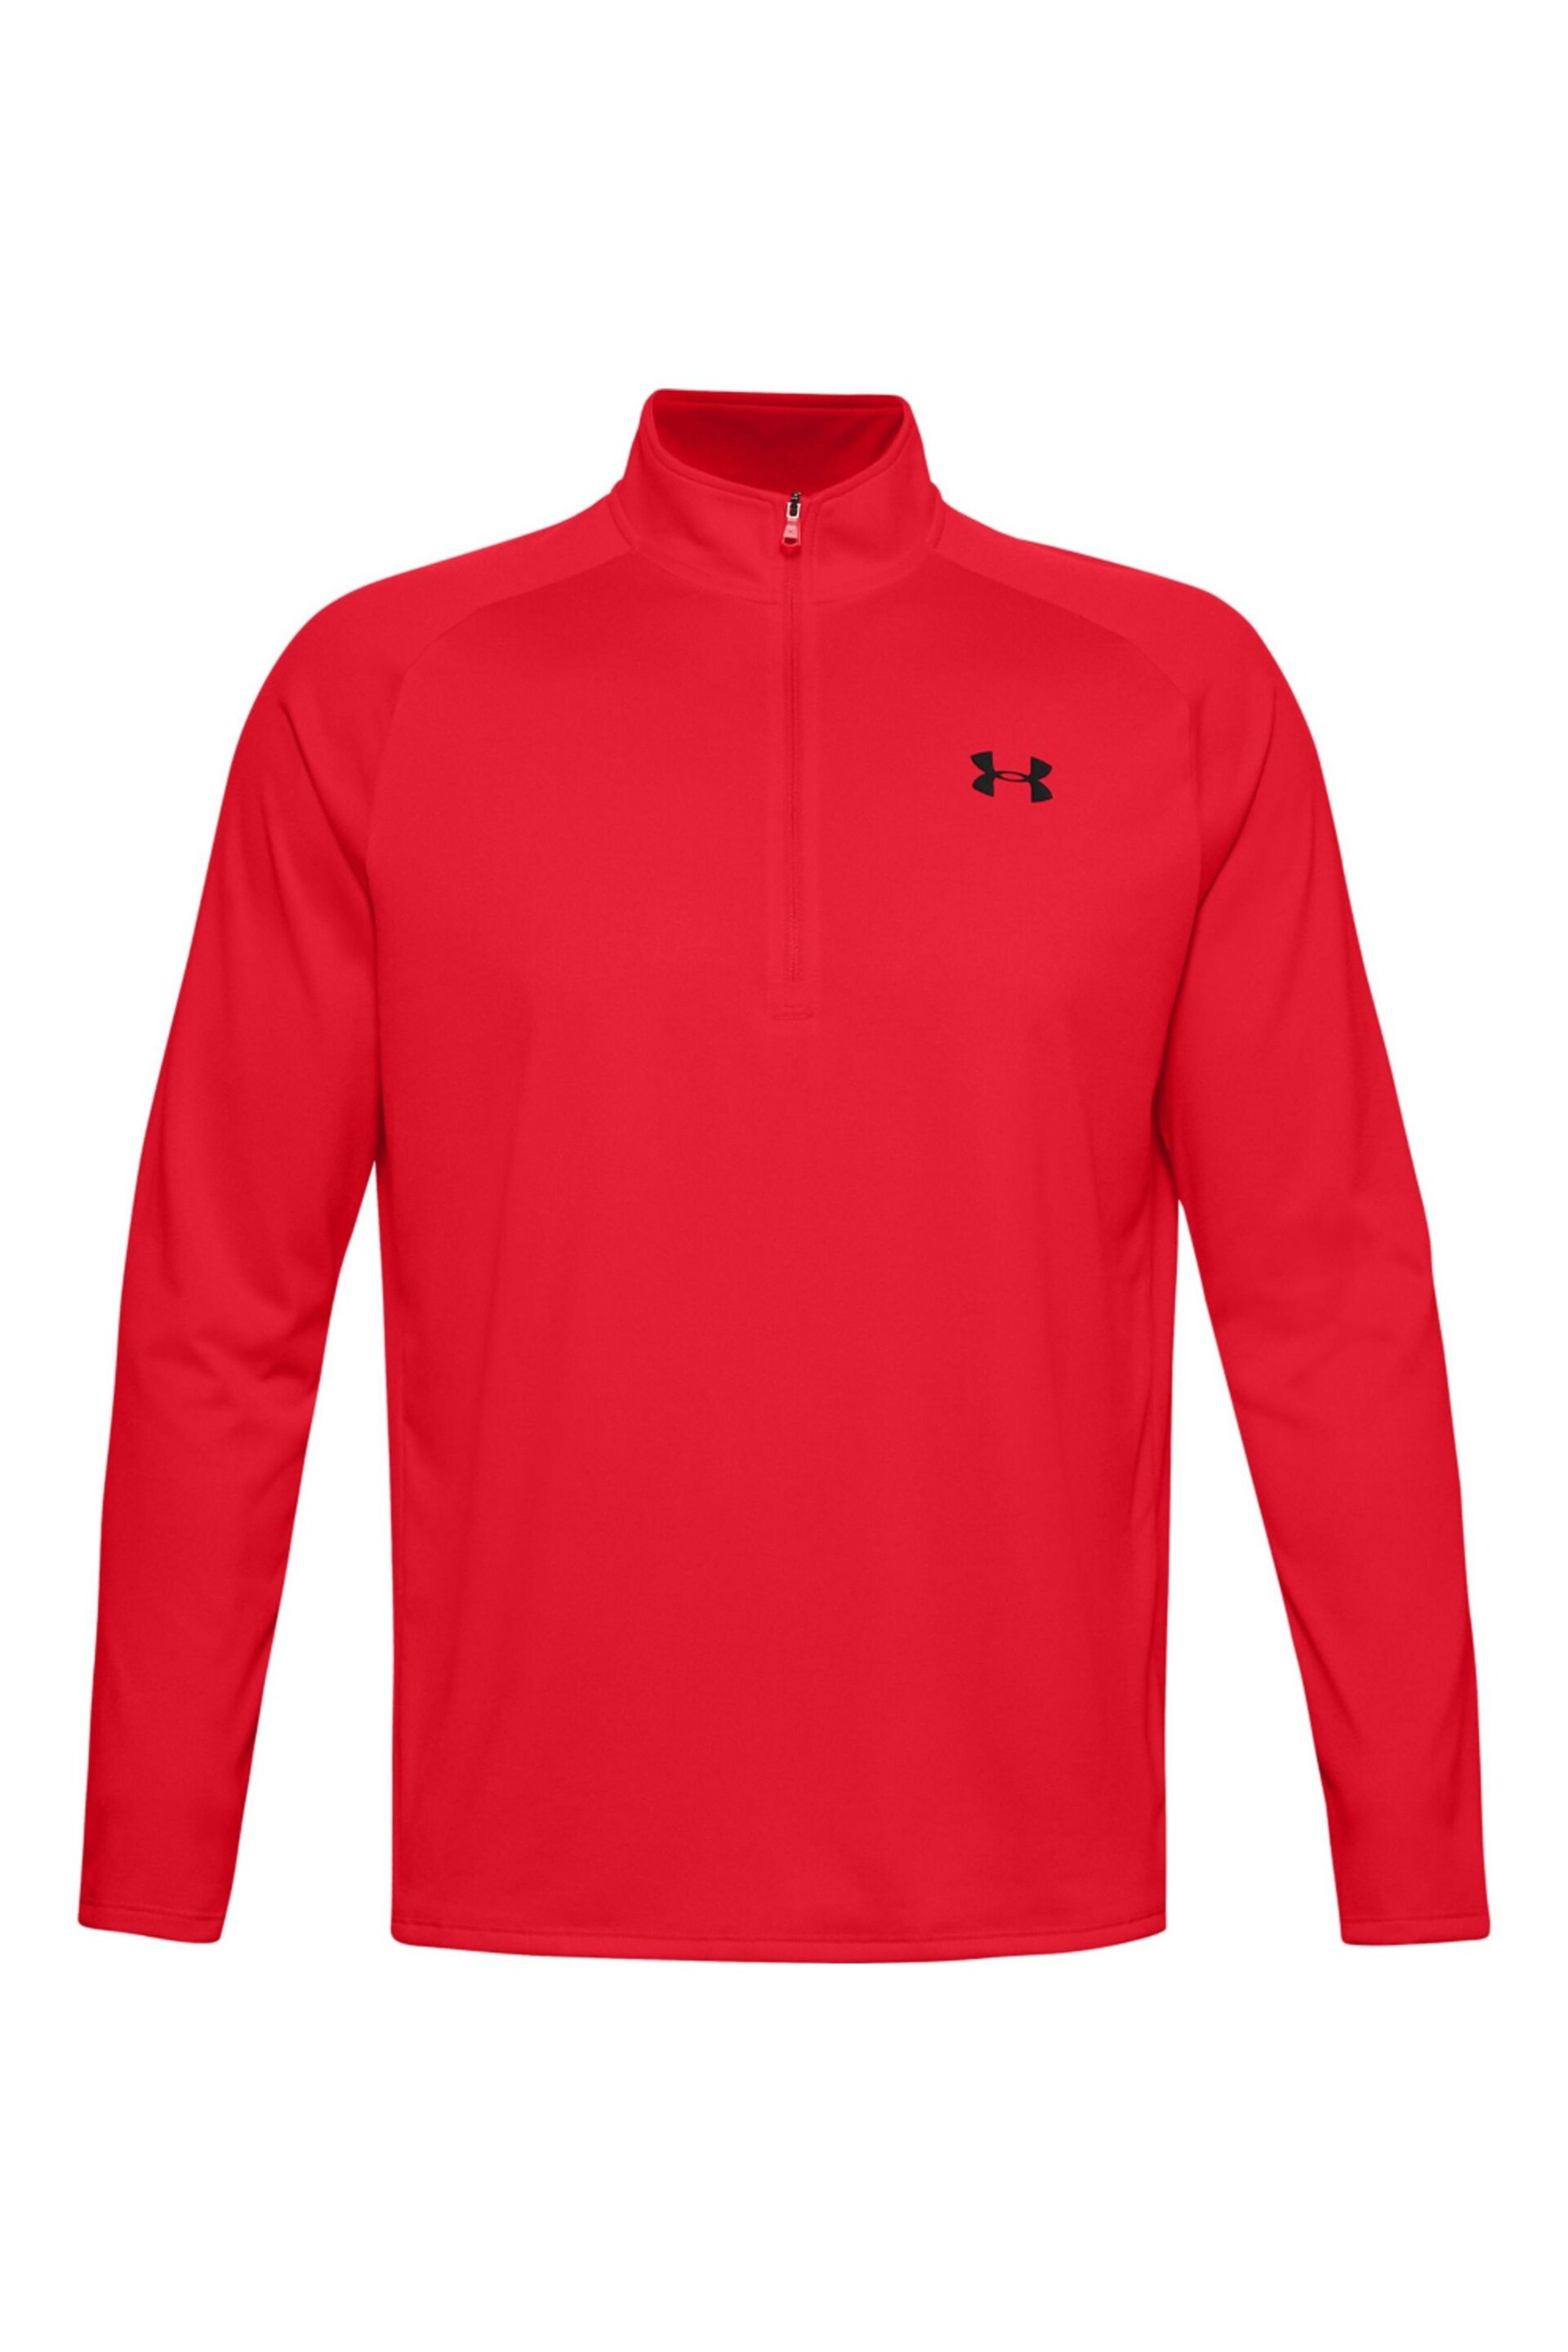 Under Armour Red Under Armour Red Tech 2.0 1/2 Zip Top - Image 5 of 6